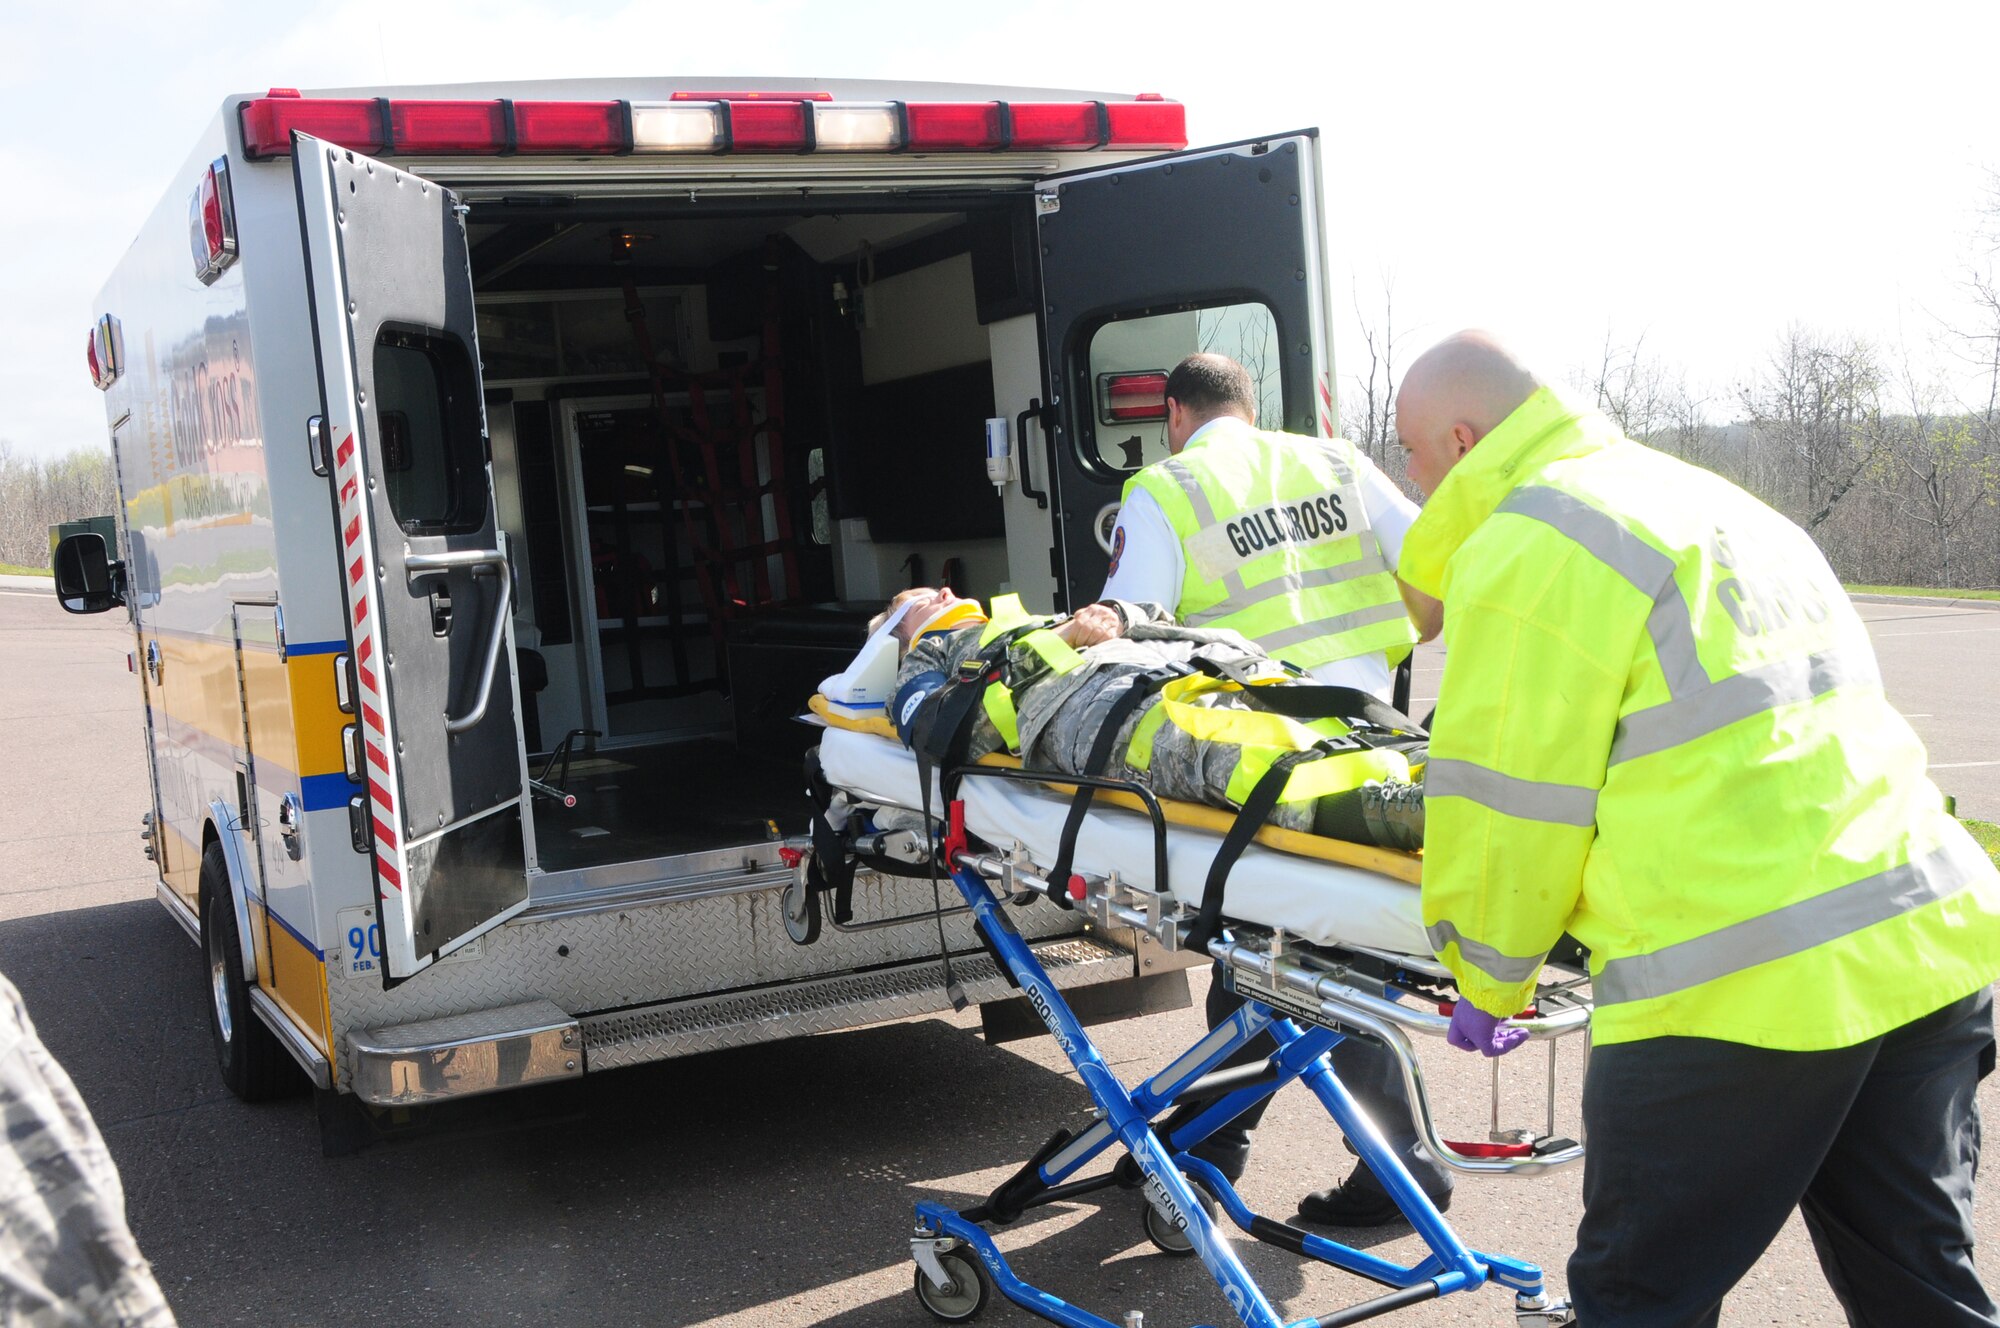 A 148th Fighter Wing member with simulated injuries is loaded into an ambulance by EMS responders from Gold Cross.  Both the 148th Fighter Wing and local emergency responders were participating in an emergency response training exercise on May 2, 2012 at the 148th Fighter Wing, Duluth, Minn. ( National Guard photo by Master Sgt. Ralph J. Kapustka)